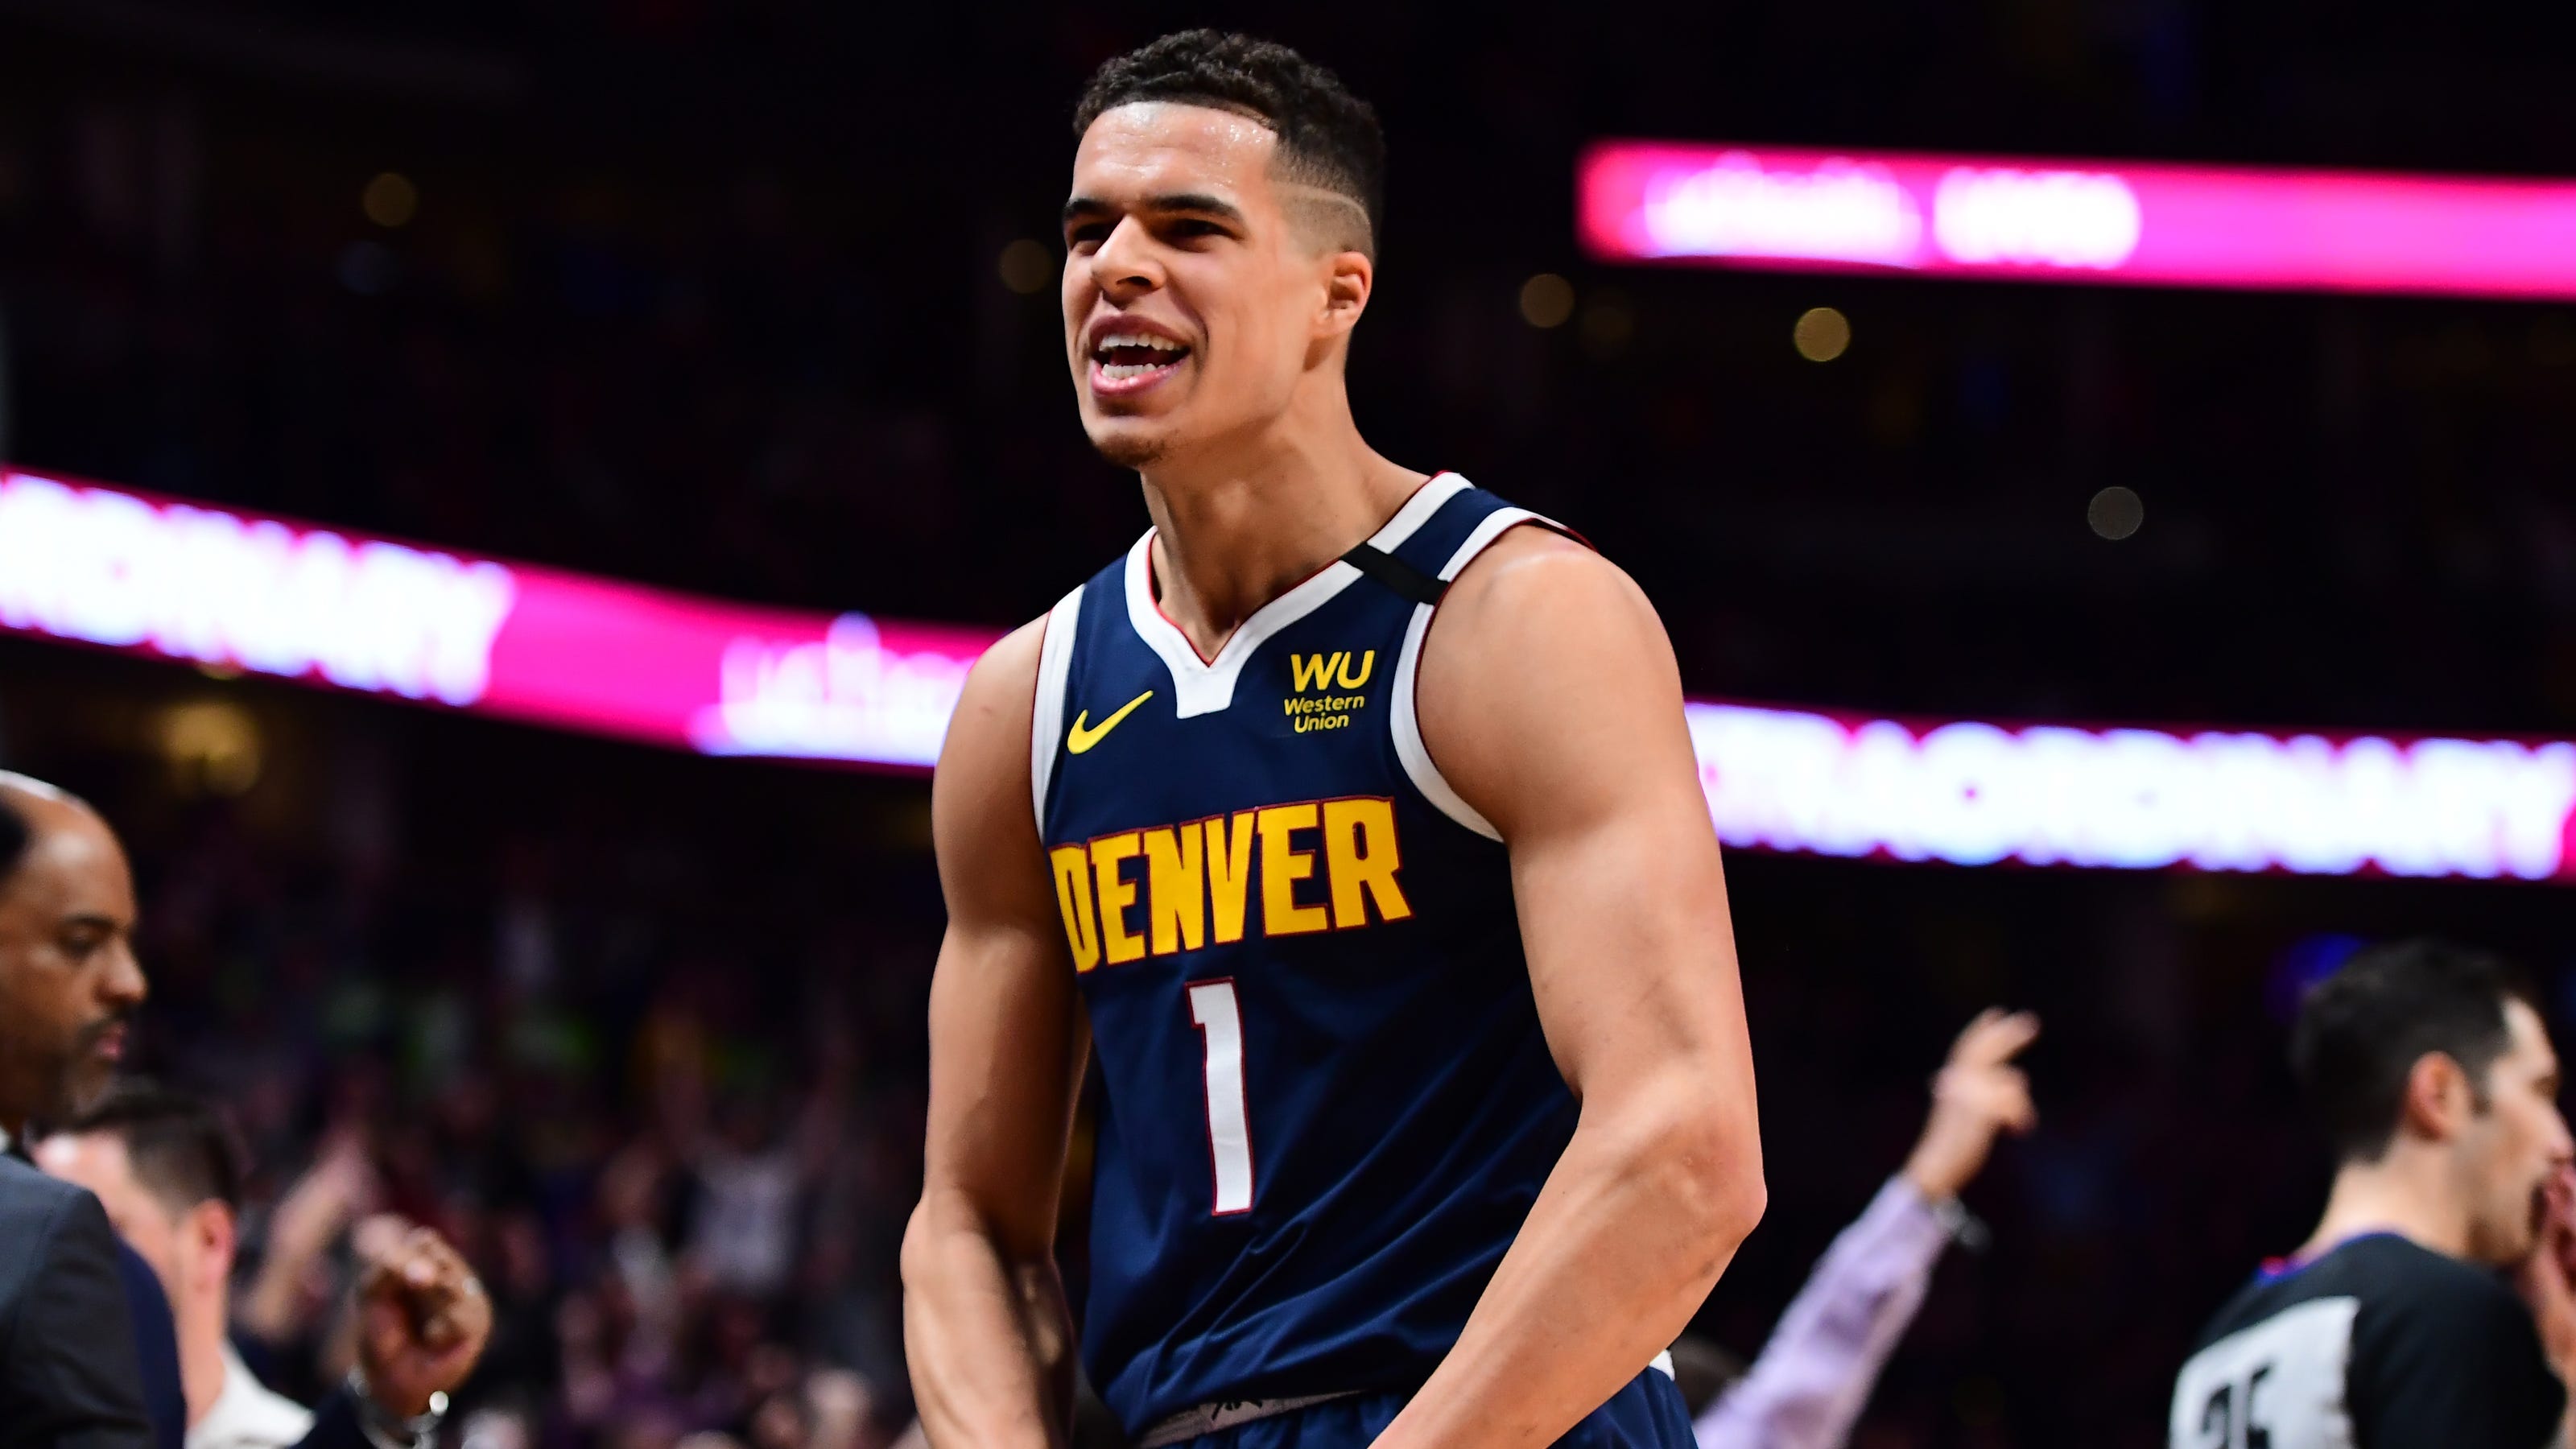 Nuggets talk to Michael Porter Jr. about his coron